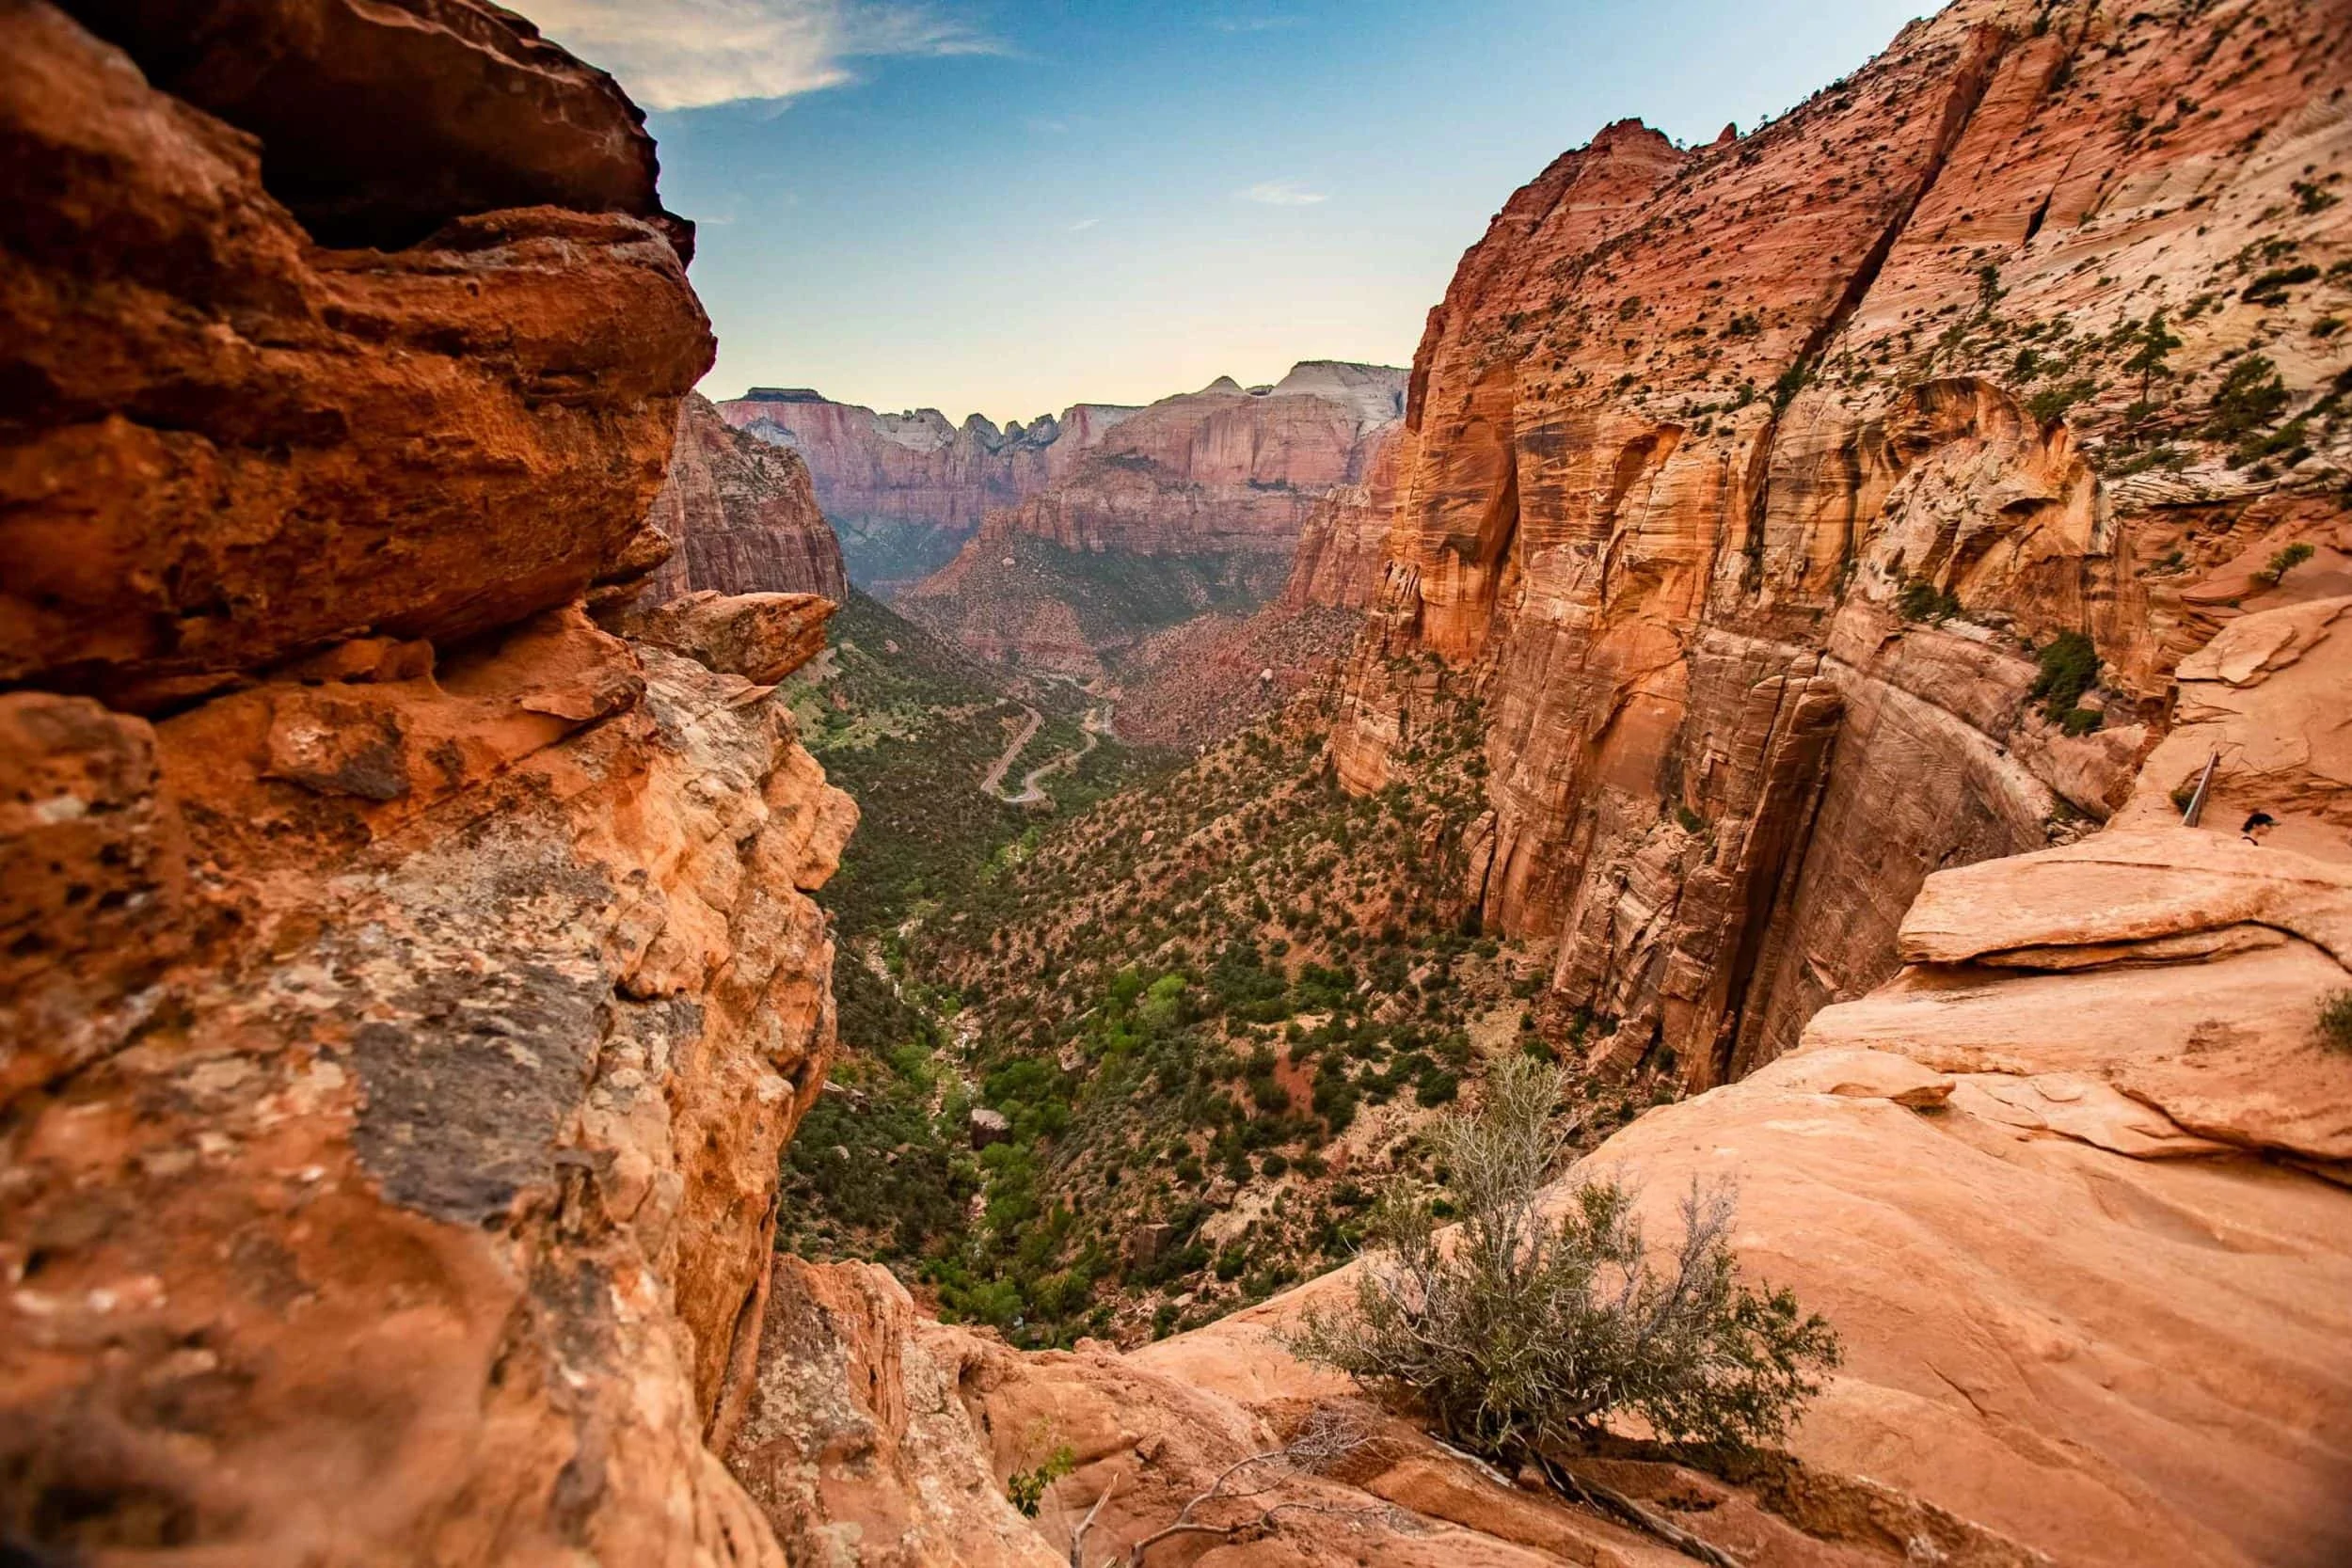 The Canyon overlook in zion national park is a colorful vista surrounded by massive red stone mountains.